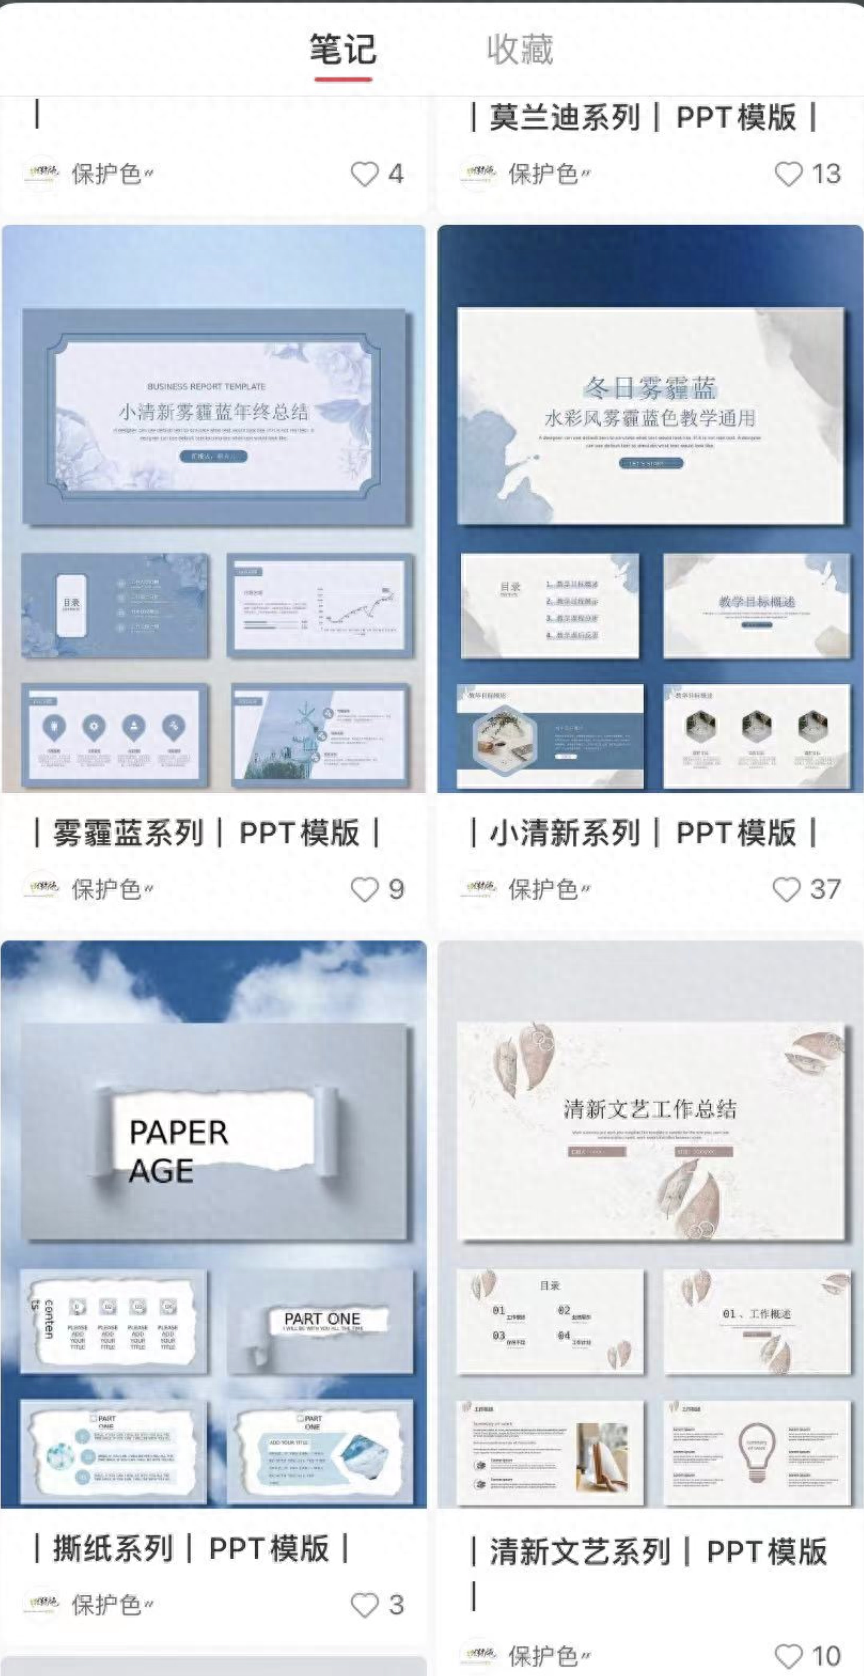 Why do some people often post PPT templates in Xiao’s books? How do they make money from this?